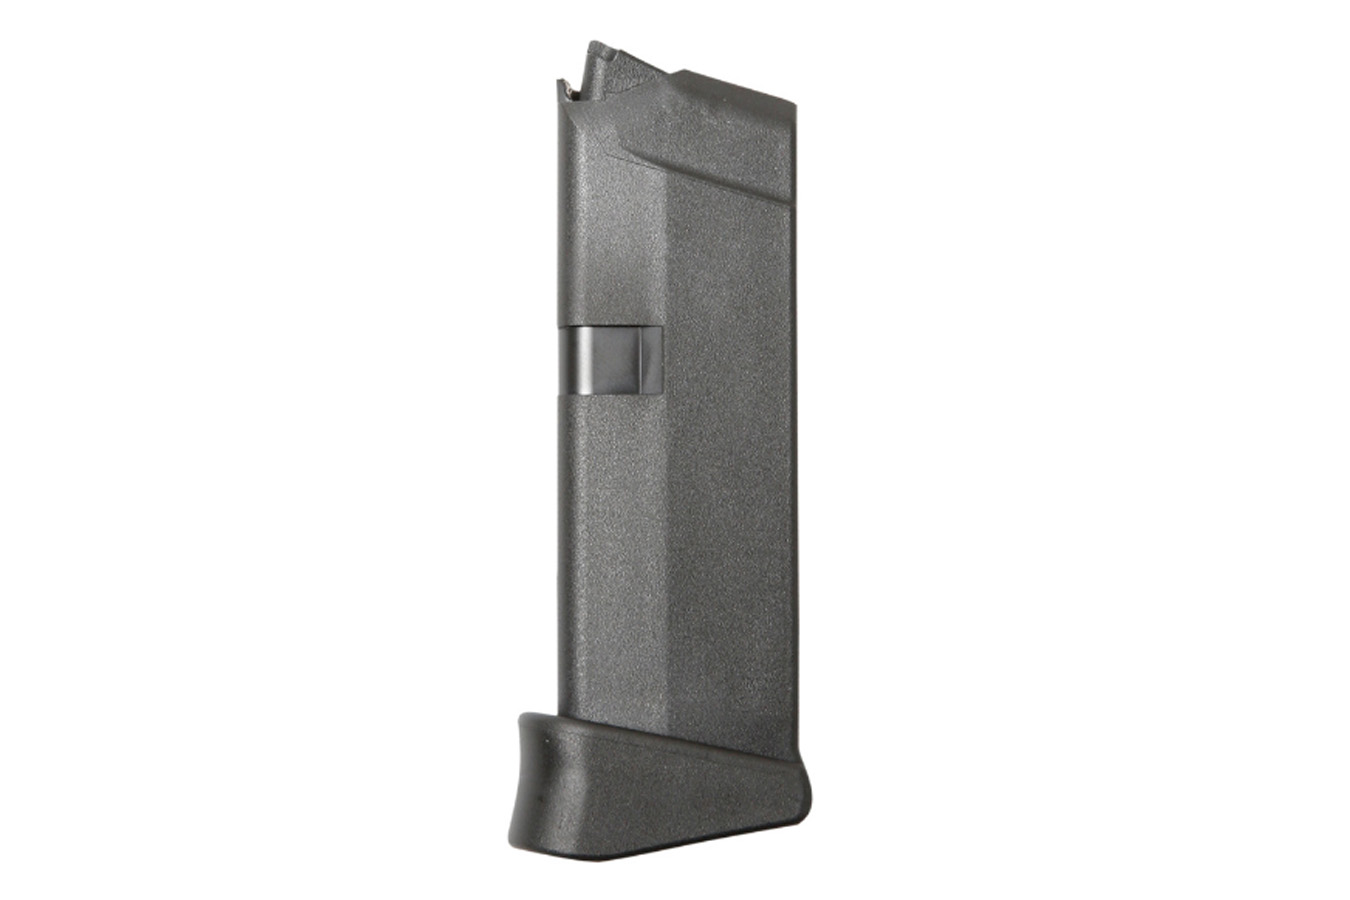 GLOCK 42 380 ACP 6-ROUND FACTORY MAGAZINE WITH EXTENSION